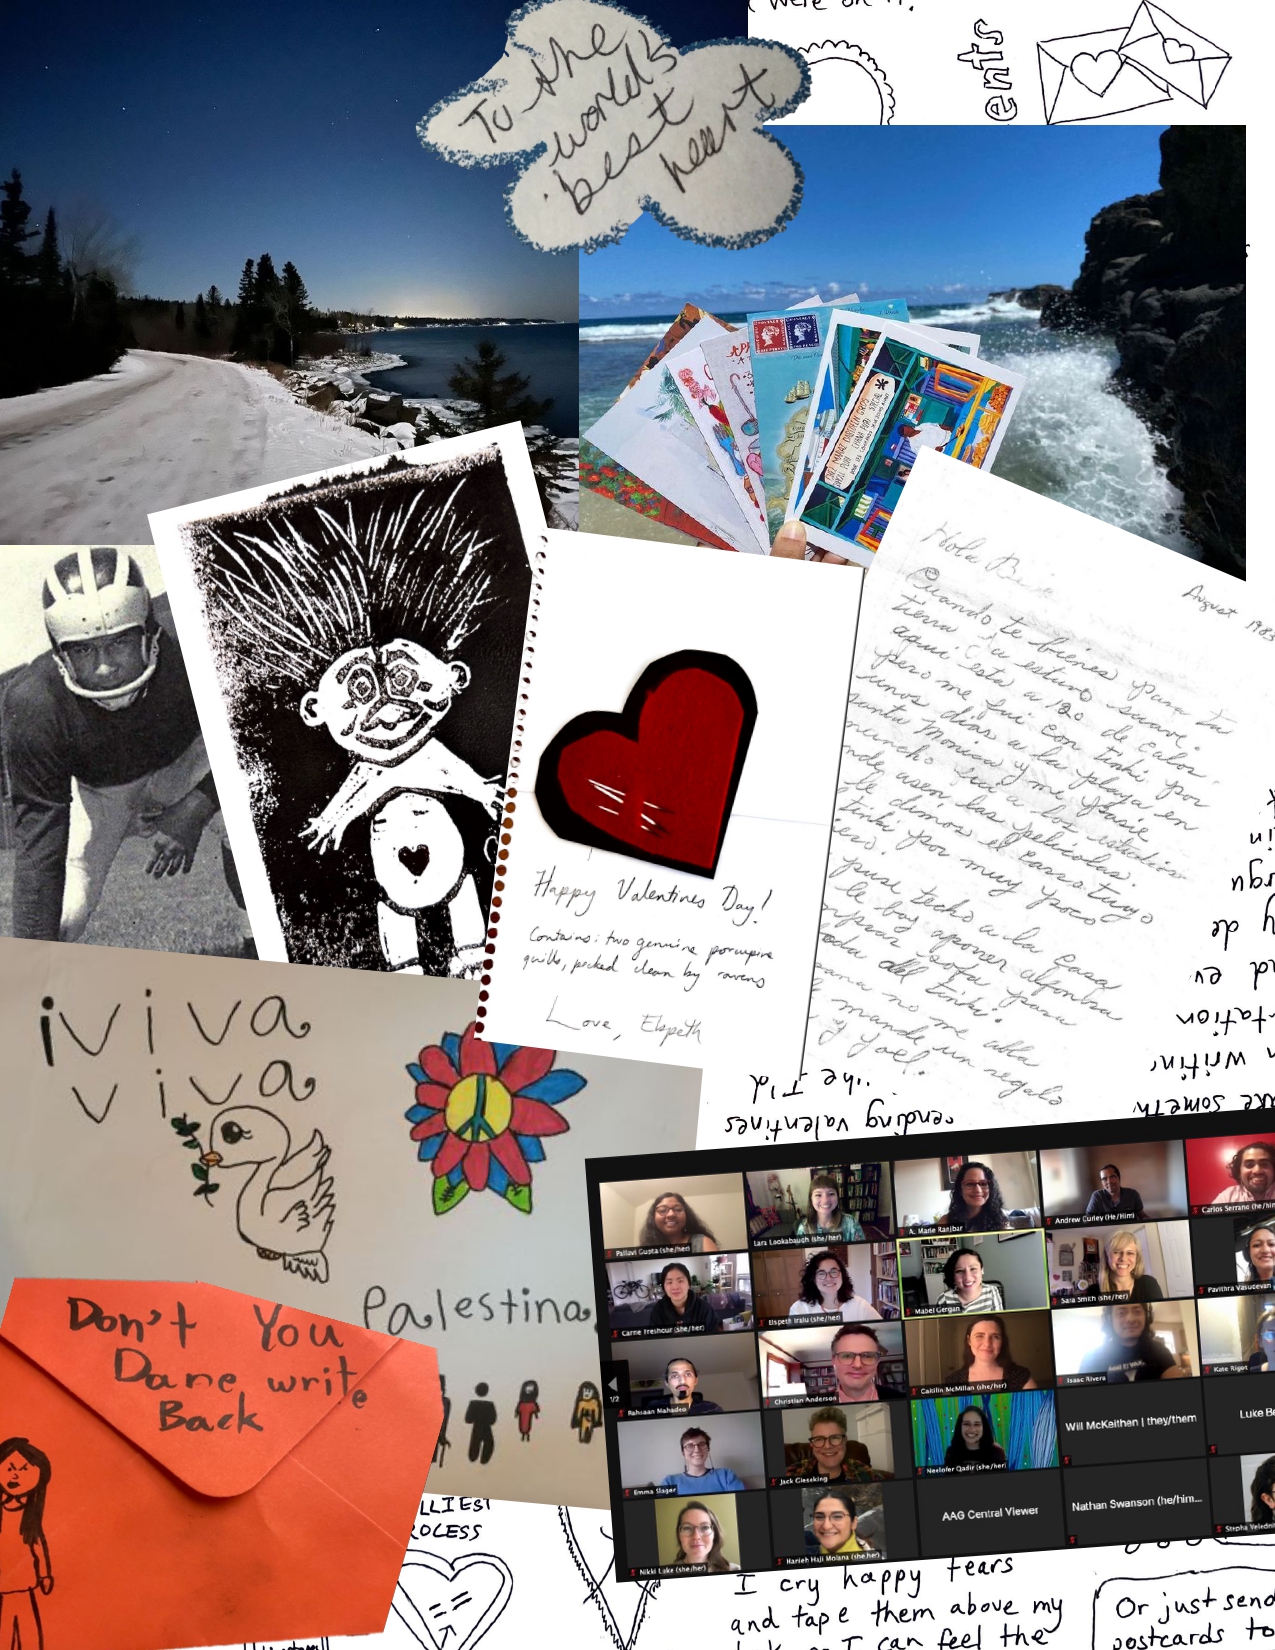 A collage of photos and materials provided by issue authors. These include: a photo of a landscape with stars shining above a curved snowy road disappearing into a wooded horizon along the coast of Gichigami/Lake Superior; a cutout of cursive text written by Caitilin McMillan’s mother that reads “to the world's best heart”; a photo of Neelofer Qadir’s hand holding colorful postcards in front of the blue water of Gris Gris, Mauritius; a handwritten letter in Spanish dated August 1983 from Alana de Hinojosa’s grandmother to her mother, Evelina “Bebe”, asking for her to come back home to Calexico, California; a black-and-white troll block print and a Valentine's Day card with porcupine quills piercing a red-and-black heart and the handwritten message “Happy Valentines Day! Contains two genuine porcupine quills, picked clean by ravens. Love, Elspeth”; a black-and-white photograph of Dr. Donald Deskins Jr. in a three-point stance wearing a football uniform; a colourful poster with doves and peace flowers and text that reads “Viva! Viva! Palestina!”; an orange envelope reading “don't you dare write back!” with a hand-drawn scowling figure; a screenshot of a Zoom grid of smiling attendees at the American Association of Geographers 2021 Desirable Futures sessions; and background text and images from valentines written by Elspeth Iralu.